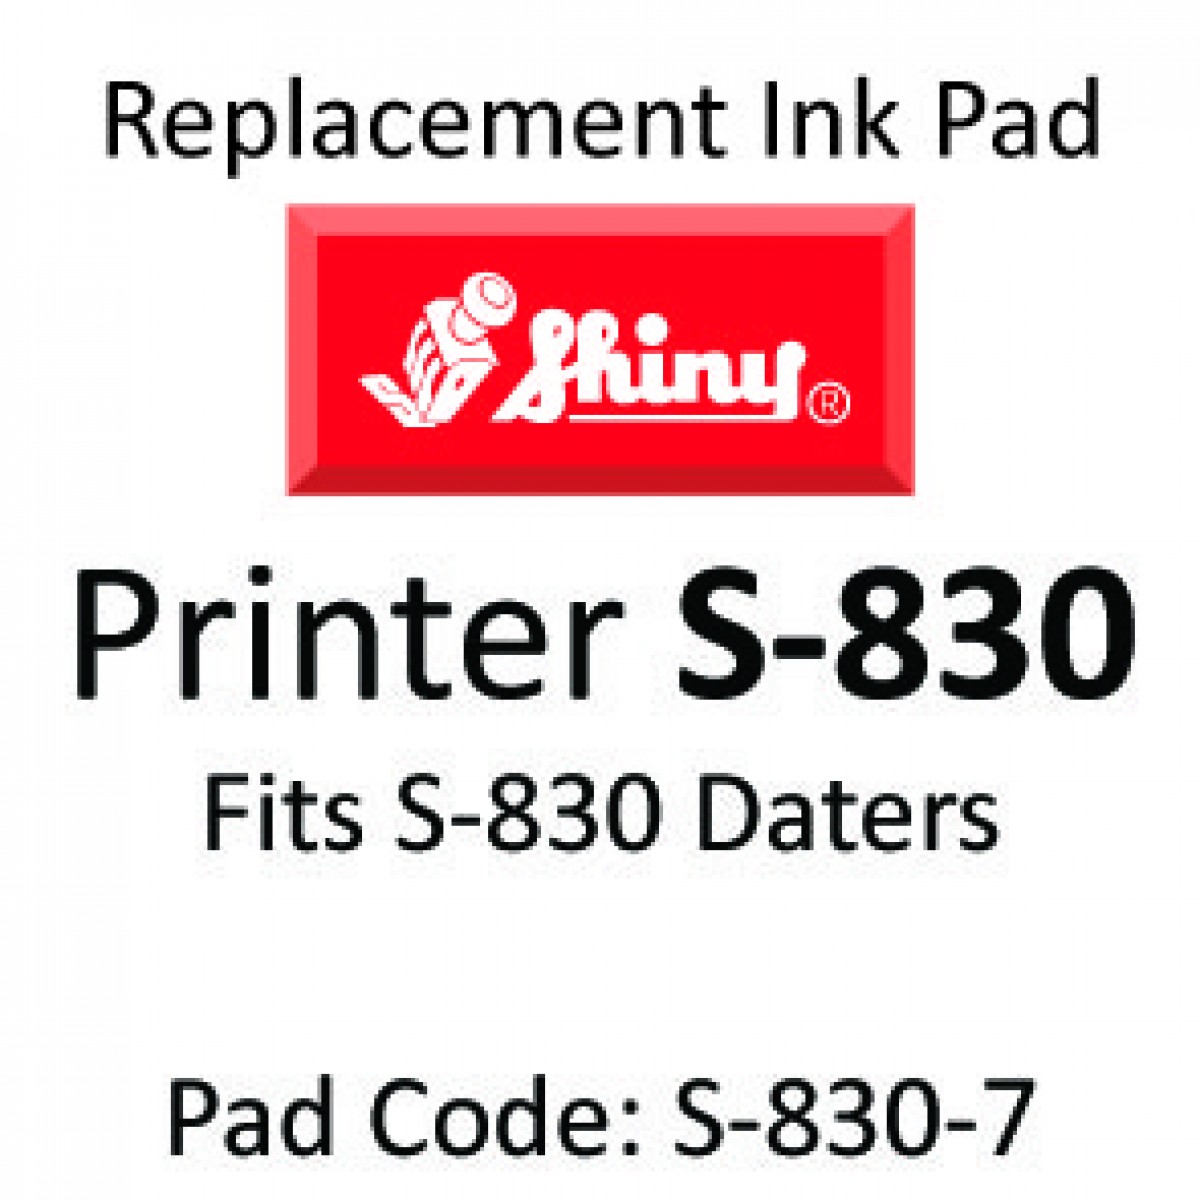 Shiny S-830-7 Replacement Pad for the Printer S-830 Black Ink 